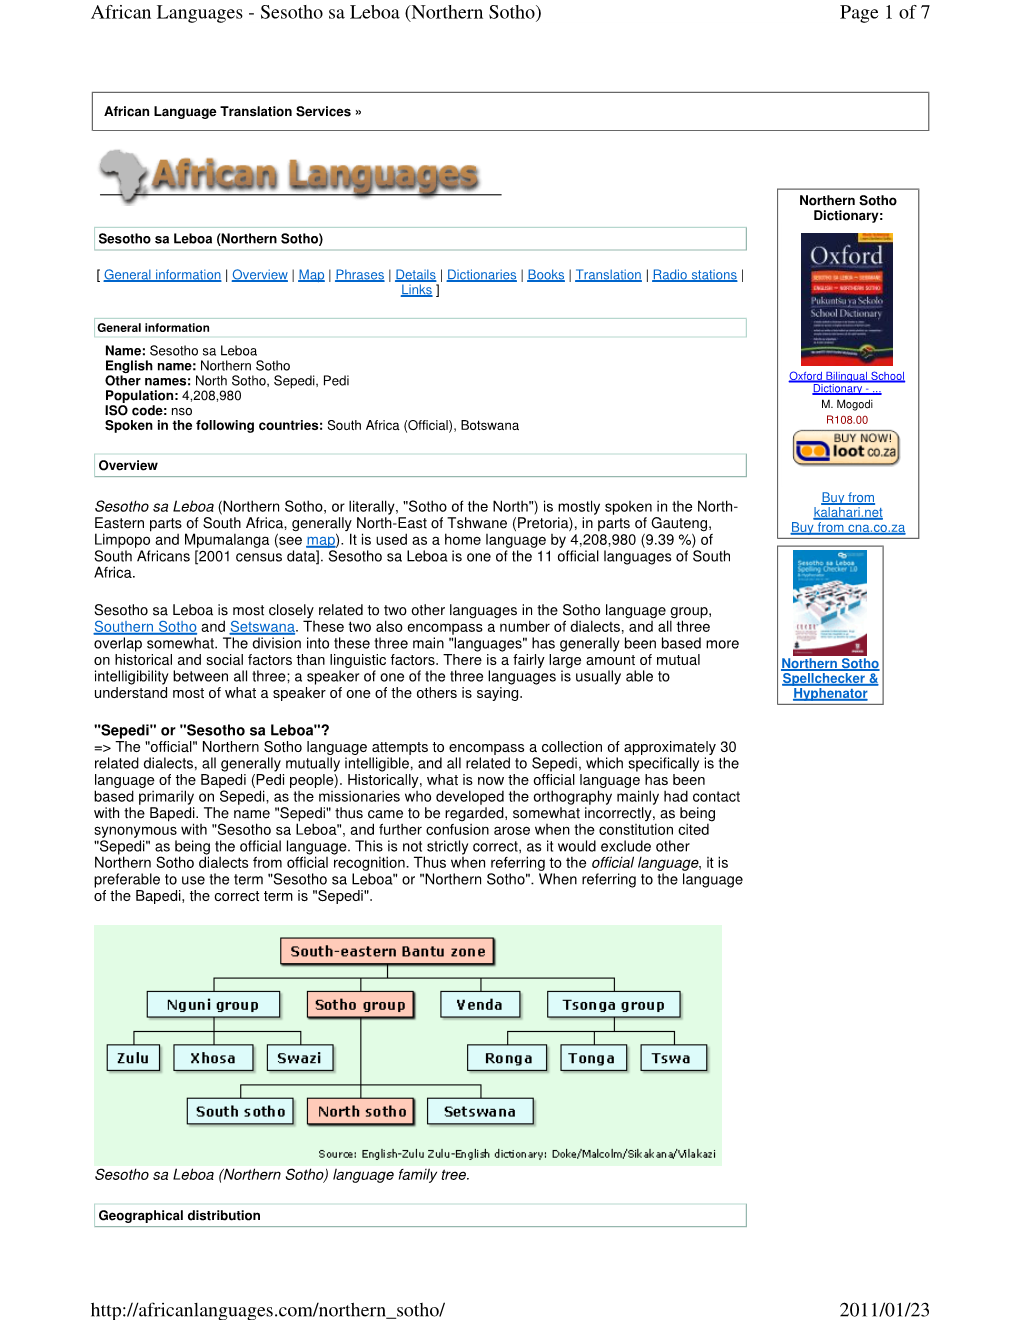 Page 1 of 7 African Languages